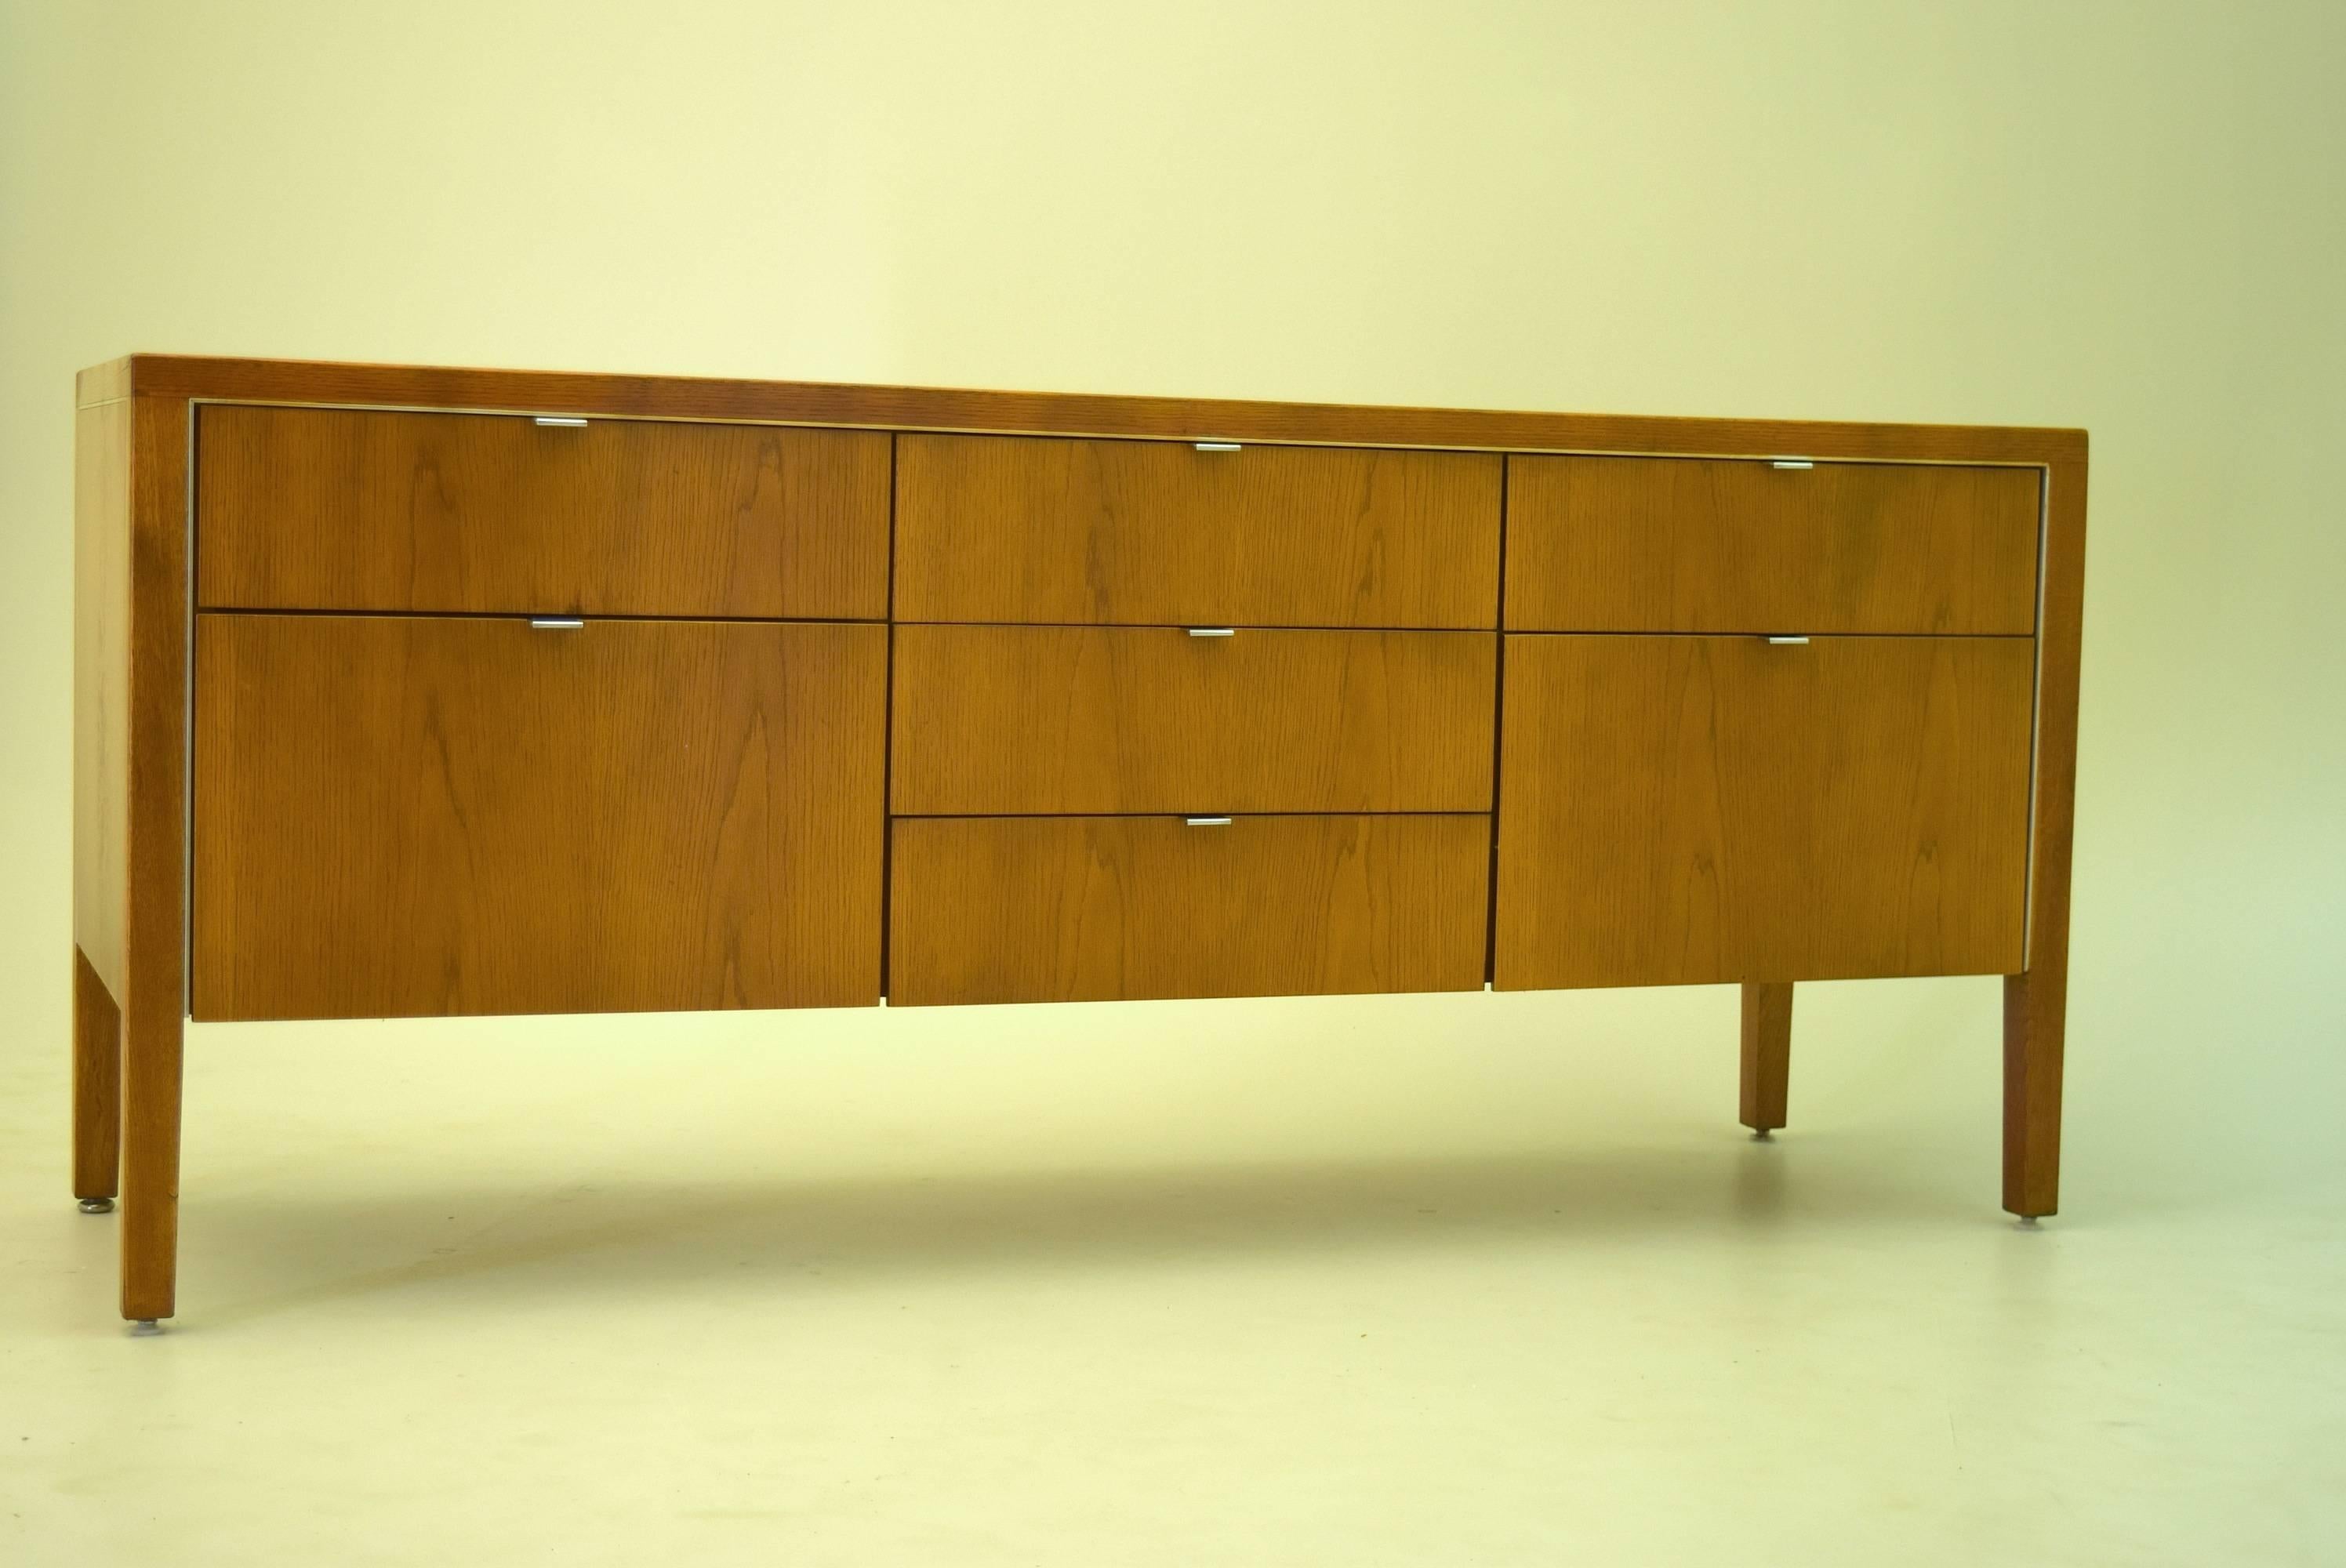 20th Century Oak Credenza by Domore Stow Davis for Ashland Oil